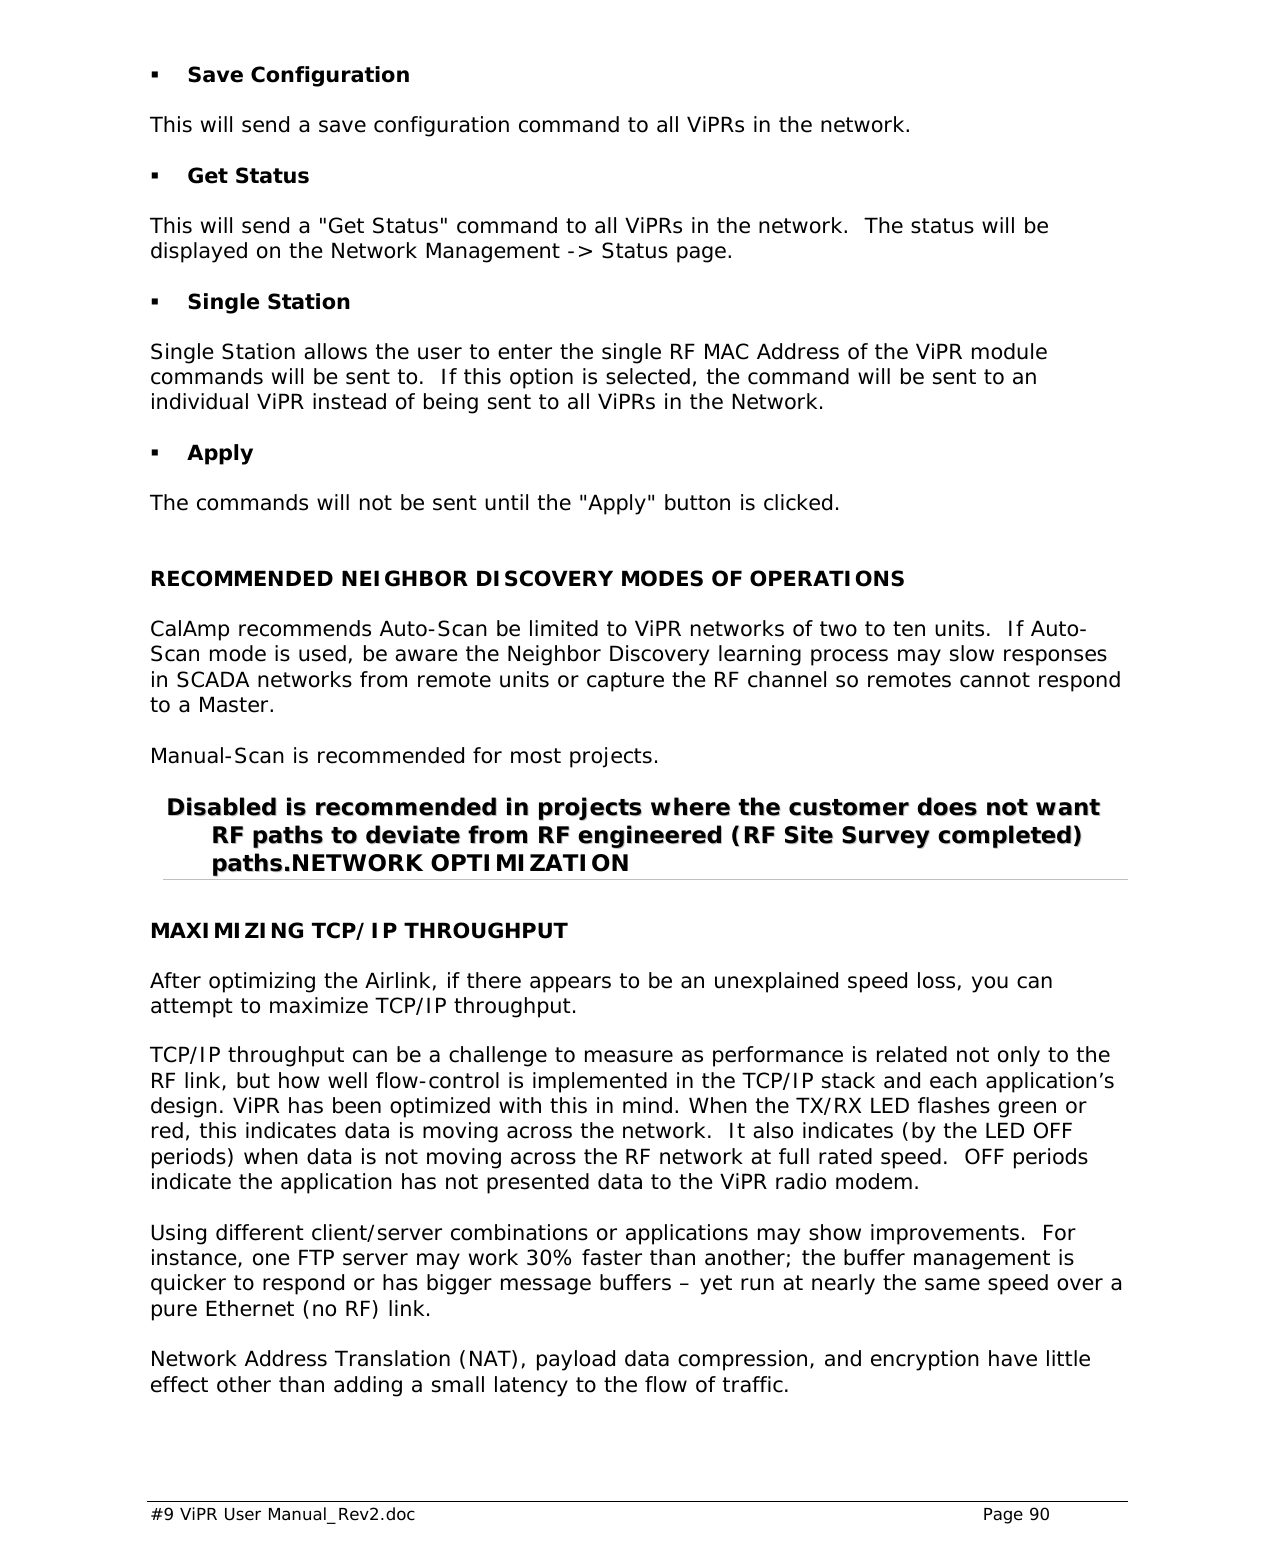  #9 ViPR User Manual_Rev2.doc    Page 90   Save Configuration This will send a save configuration command to all ViPRs in the network.  Get Status This will send a &quot;Get Status&quot; command to all ViPRs in the network.  The status will be displayed on the Network Management -&gt; Status page.  Single Station Single Station allows the user to enter the single RF MAC Address of the ViPR module commands will be sent to.  If this option is selected, the command will be sent to an individual ViPR instead of being sent to all ViPRs in the Network.  Apply  The commands will not be sent until the &quot;Apply&quot; button is clicked.   RECOMMENDED NEIGHBOR DISCOVERY MODES OF OPERATIONS CalAmp recommends Auto-Scan be limited to ViPR networks of two to ten units.  If Auto-Scan mode is used, be aware the Neighbor Discovery learning process may slow responses in SCADA networks from remote units or capture the RF channel so remotes cannot respond to a Master.  Manual-Scan is recommended for most projects.  DDiissaabblleedd  iiss  rreeccoommmmeennddeedd  iinn  pprroojjeeccttss  wwhheerree  tthhee  ccuussttoommeerr  ddooeess  nnoott  wwaanntt  RRFF  ppaatthhss  ttoo  ddeevviiaattee  ffrroomm  RRFF  eennggiinneeeerreedd  ((RRFF  SSiittee  SSuurrvveeyy  ccoommpplleetteedd))  ppaatthhss..NETWORK OPTIMIZATION MAXIMIZING TCP/IP THROUGHPUT After optimizing the Airlink, if there appears to be an unexplained speed loss, you can attempt to maximize TCP/IP throughput.   TCP/IP throughput can be a challenge to measure as performance is related not only to the RF link, but how well flow-control is implemented in the TCP/IP stack and each application’s design. ViPR has been optimized with this in mind. When the TX/RX LED flashes green or red, this indicates data is moving across the network.  It also indicates (by the LED OFF periods) when data is not moving across the RF network at full rated speed.  OFF periods indicate the application has not presented data to the ViPR radio modem.  Using different client/server combinations or applications may show improvements.  For instance, one FTP server may work 30% faster than another; the buffer management is quicker to respond or has bigger message buffers – yet run at nearly the same speed over a pure Ethernet (no RF) link.  Network Address Translation (NAT), payload data compression, and encryption have little effect other than adding a small latency to the flow of traffic.  